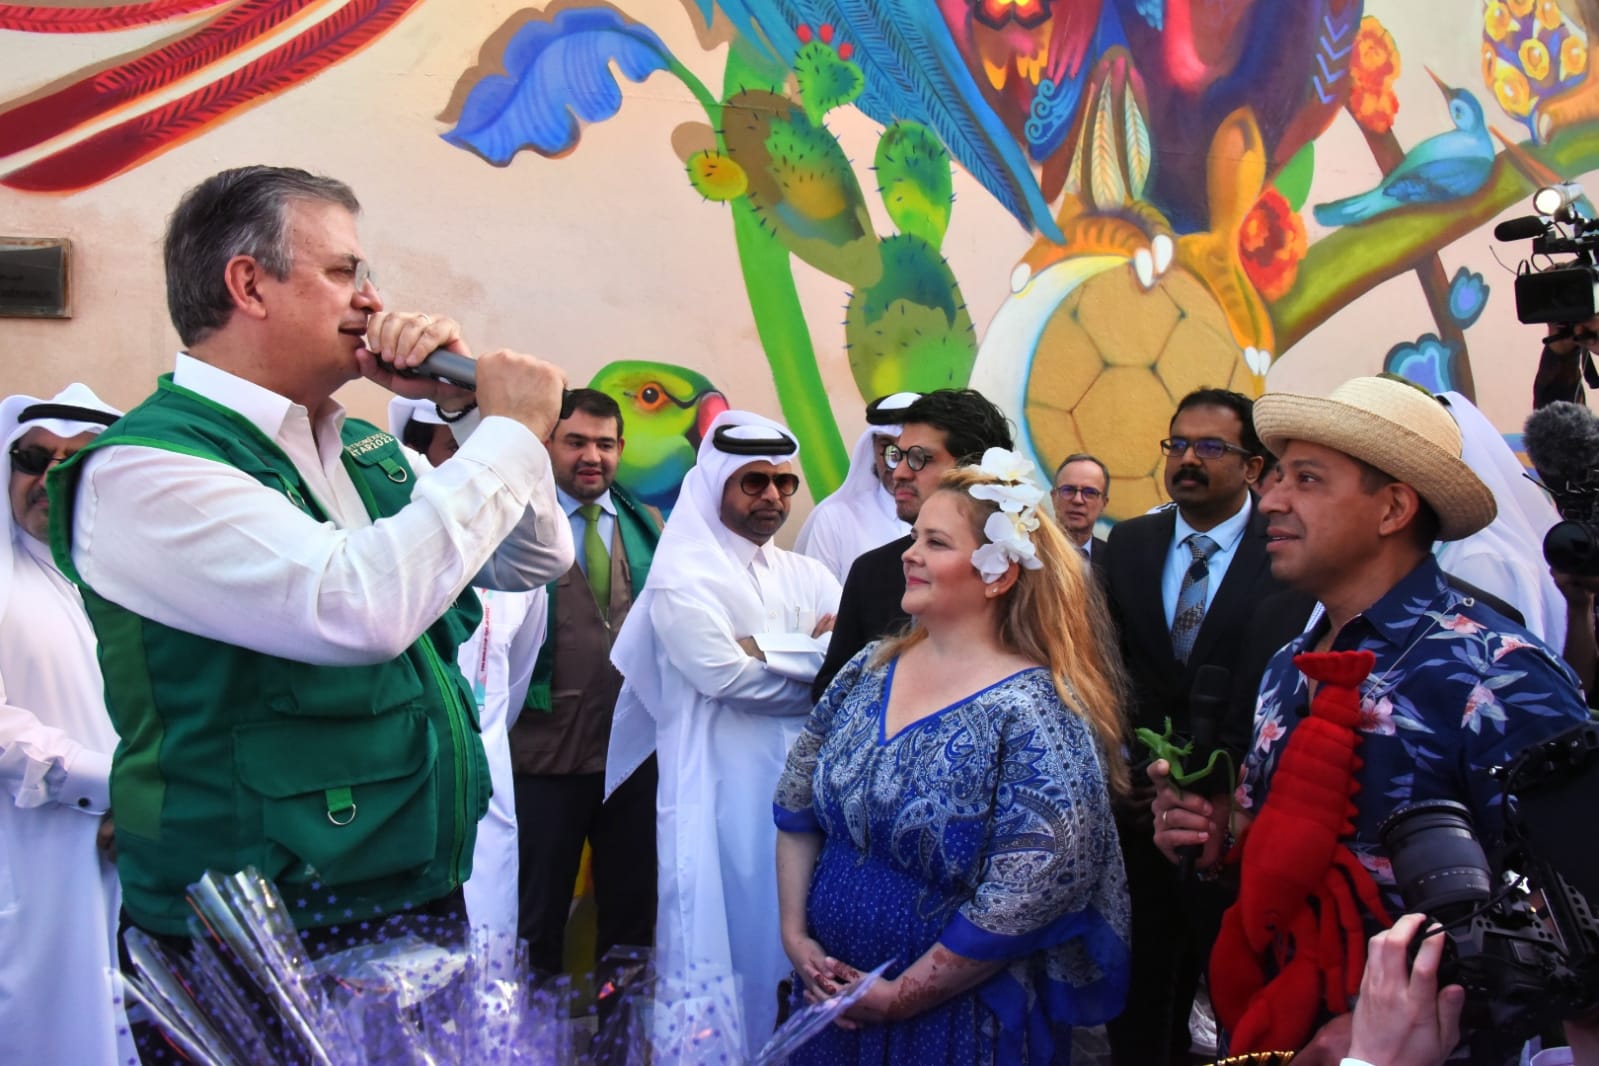 Foreign Secretary Ebrard inaugurates a space dedicated to Mexico in Doha; first Mexican avocados arrive in Qatar